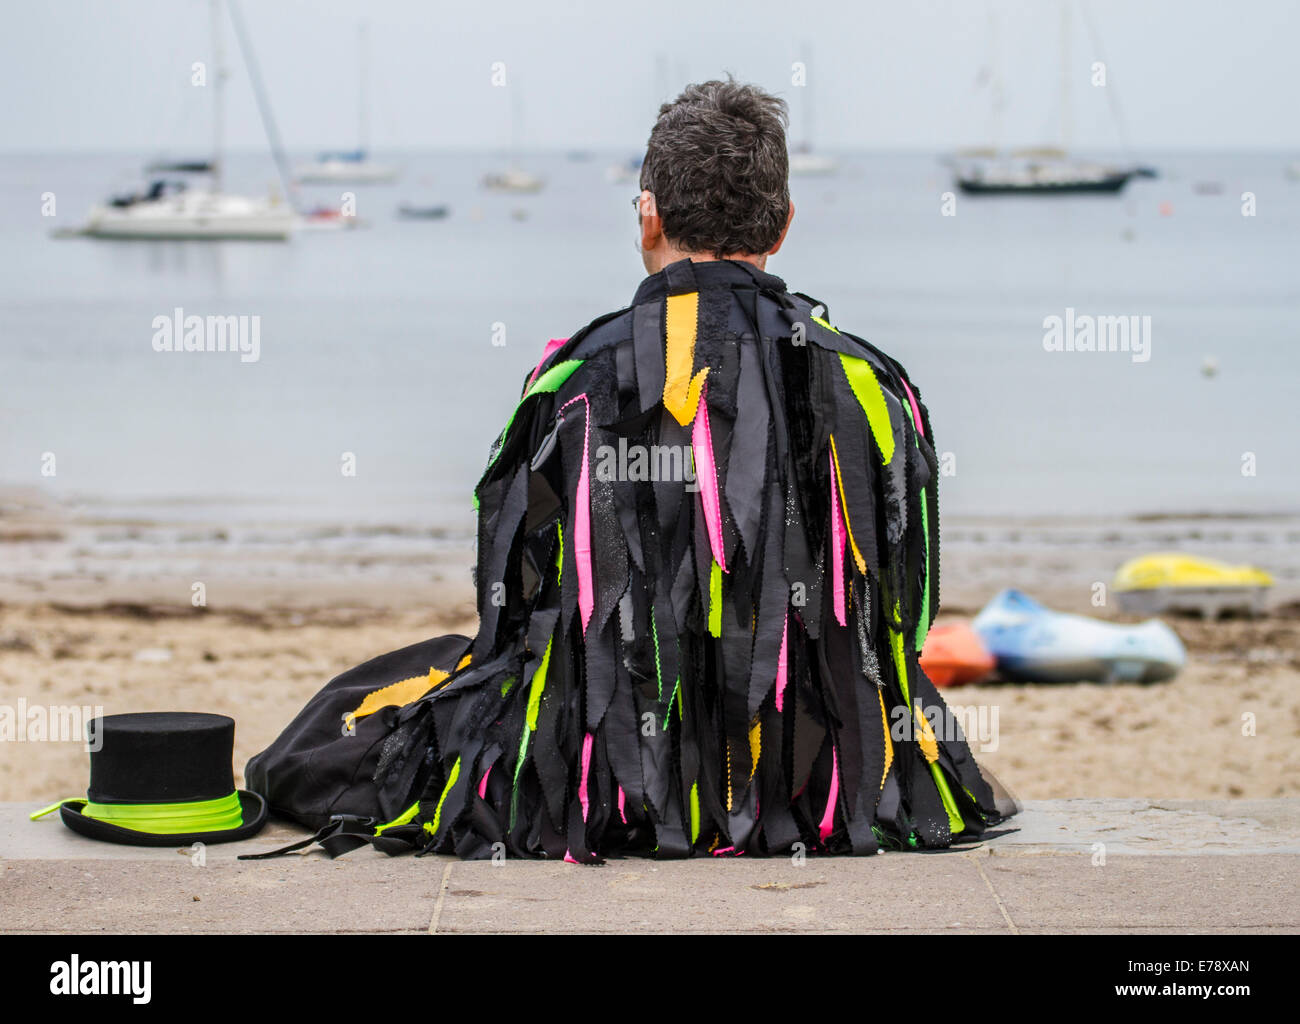 Traditional morris dancer sitting on side walk looking into bay with yachts with hat by his side Stock Photo